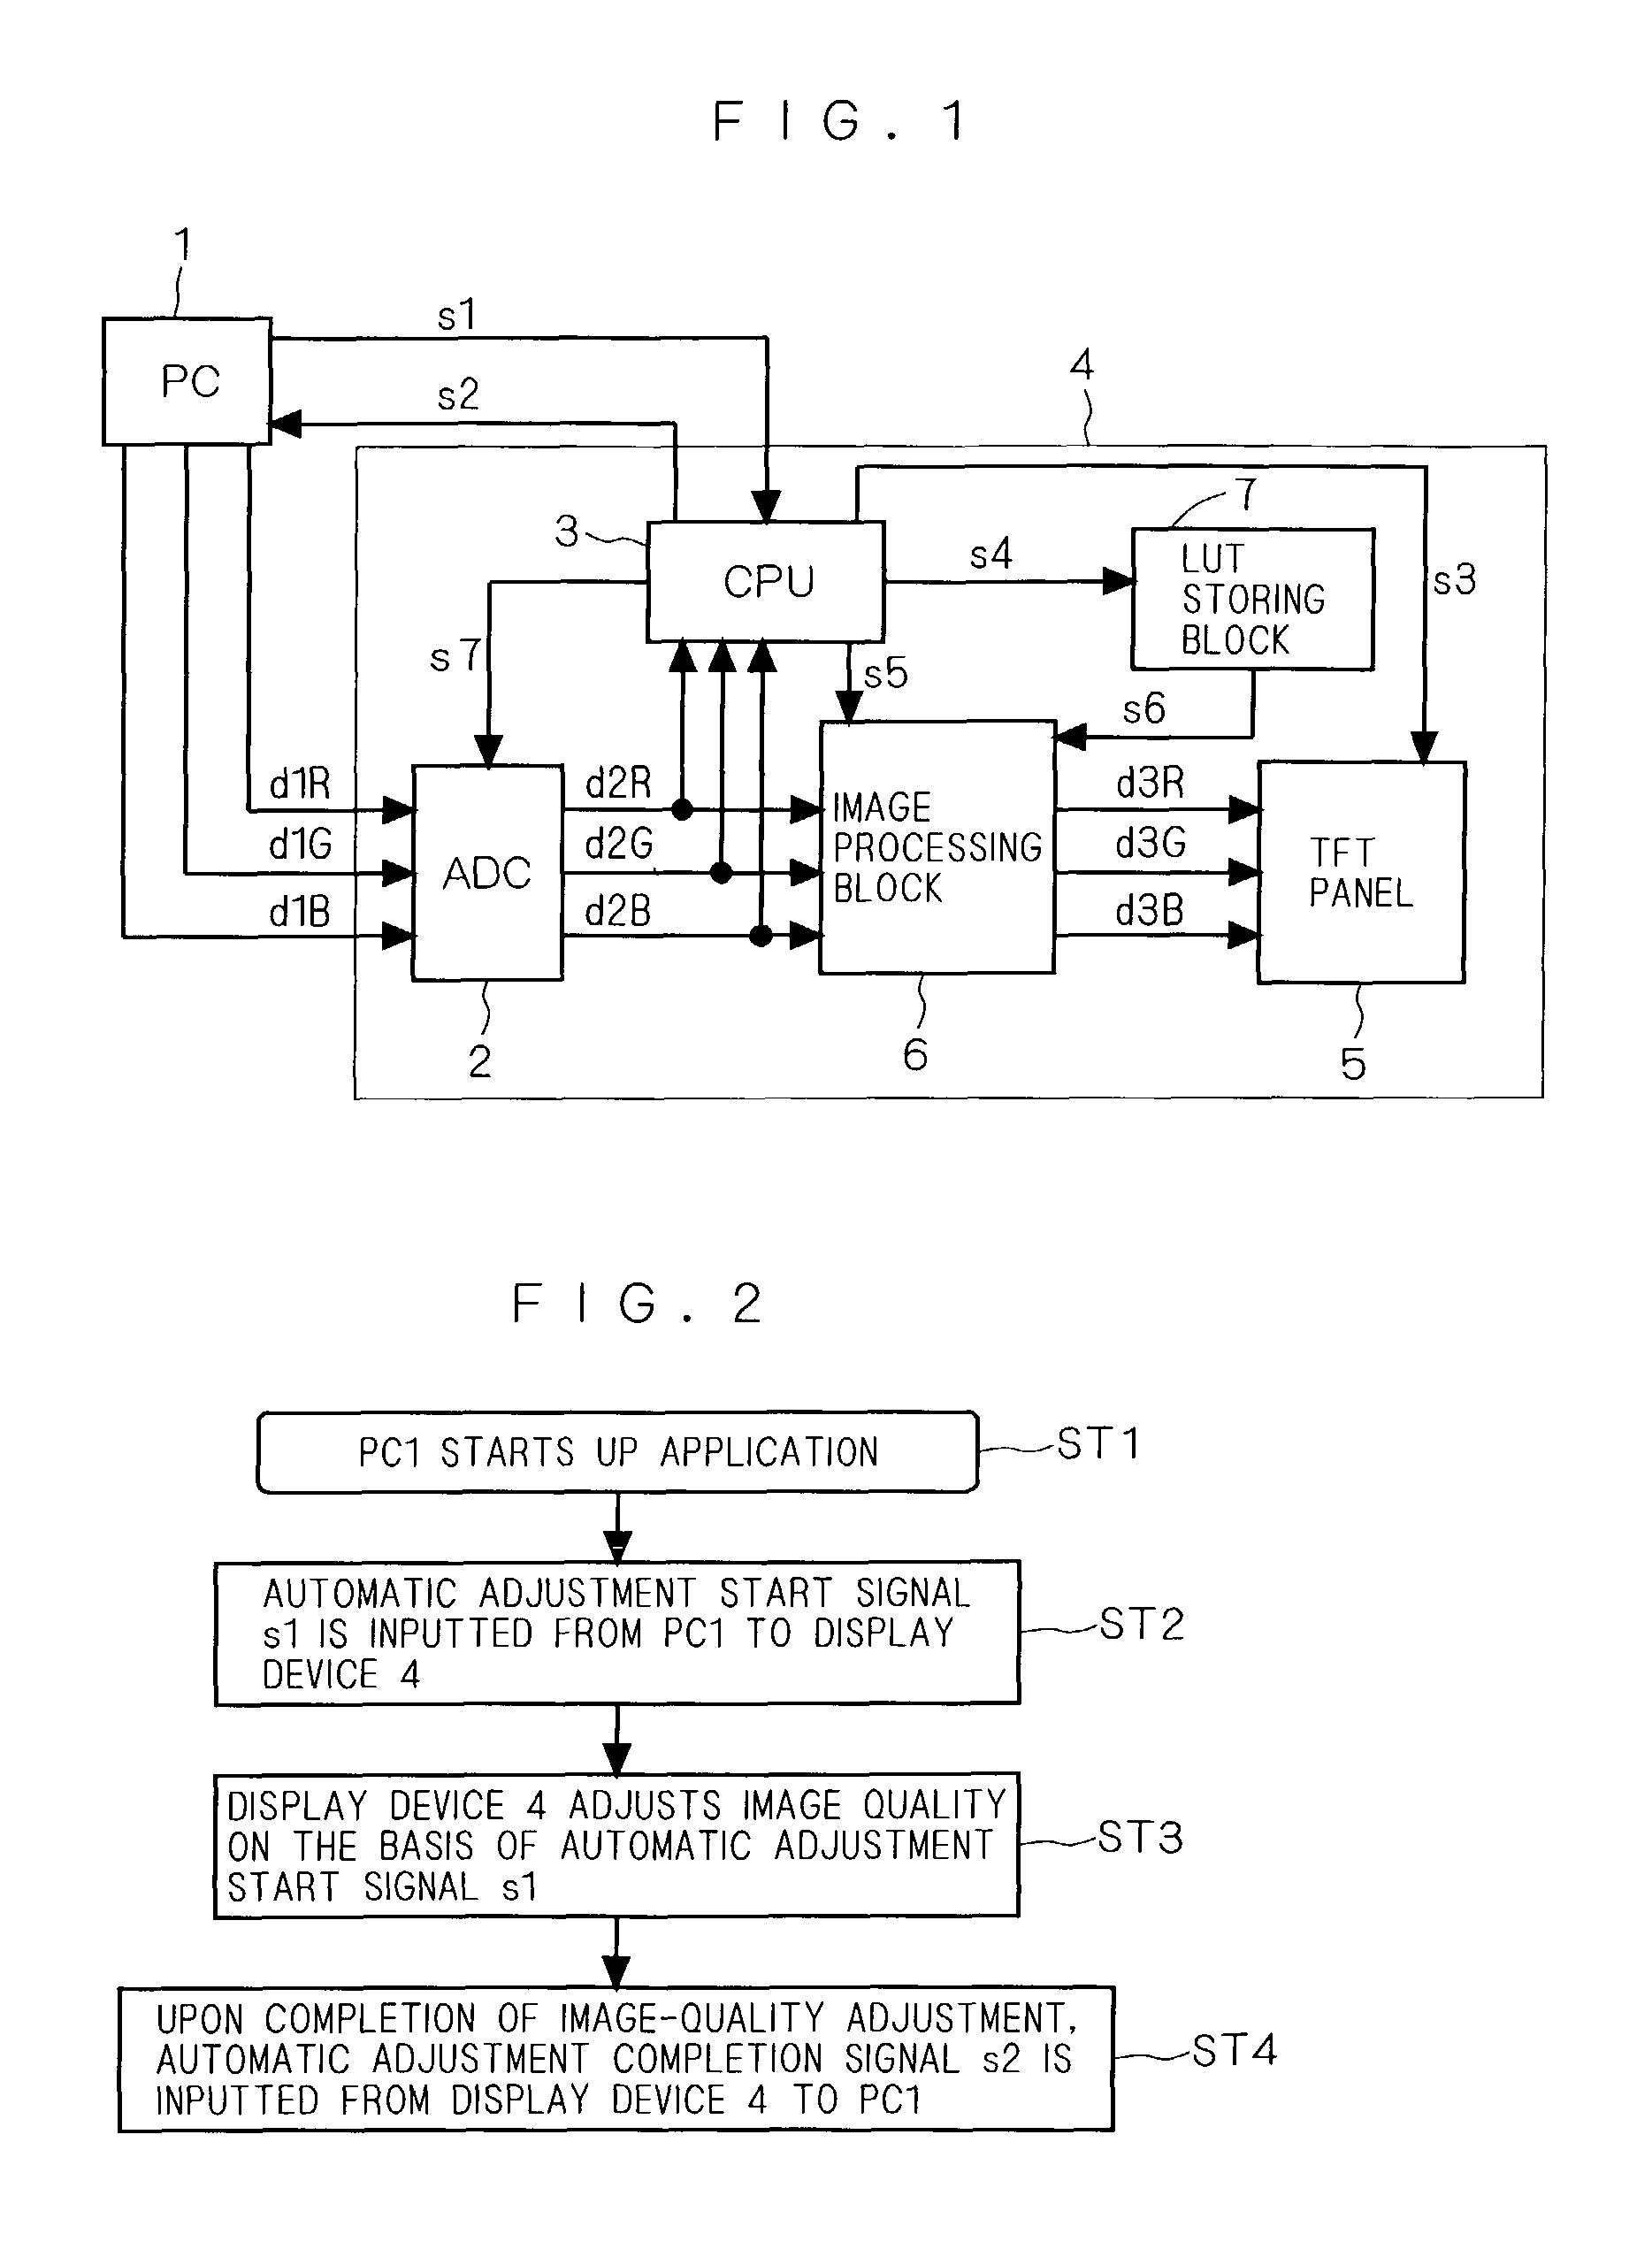 Image display system and image display device